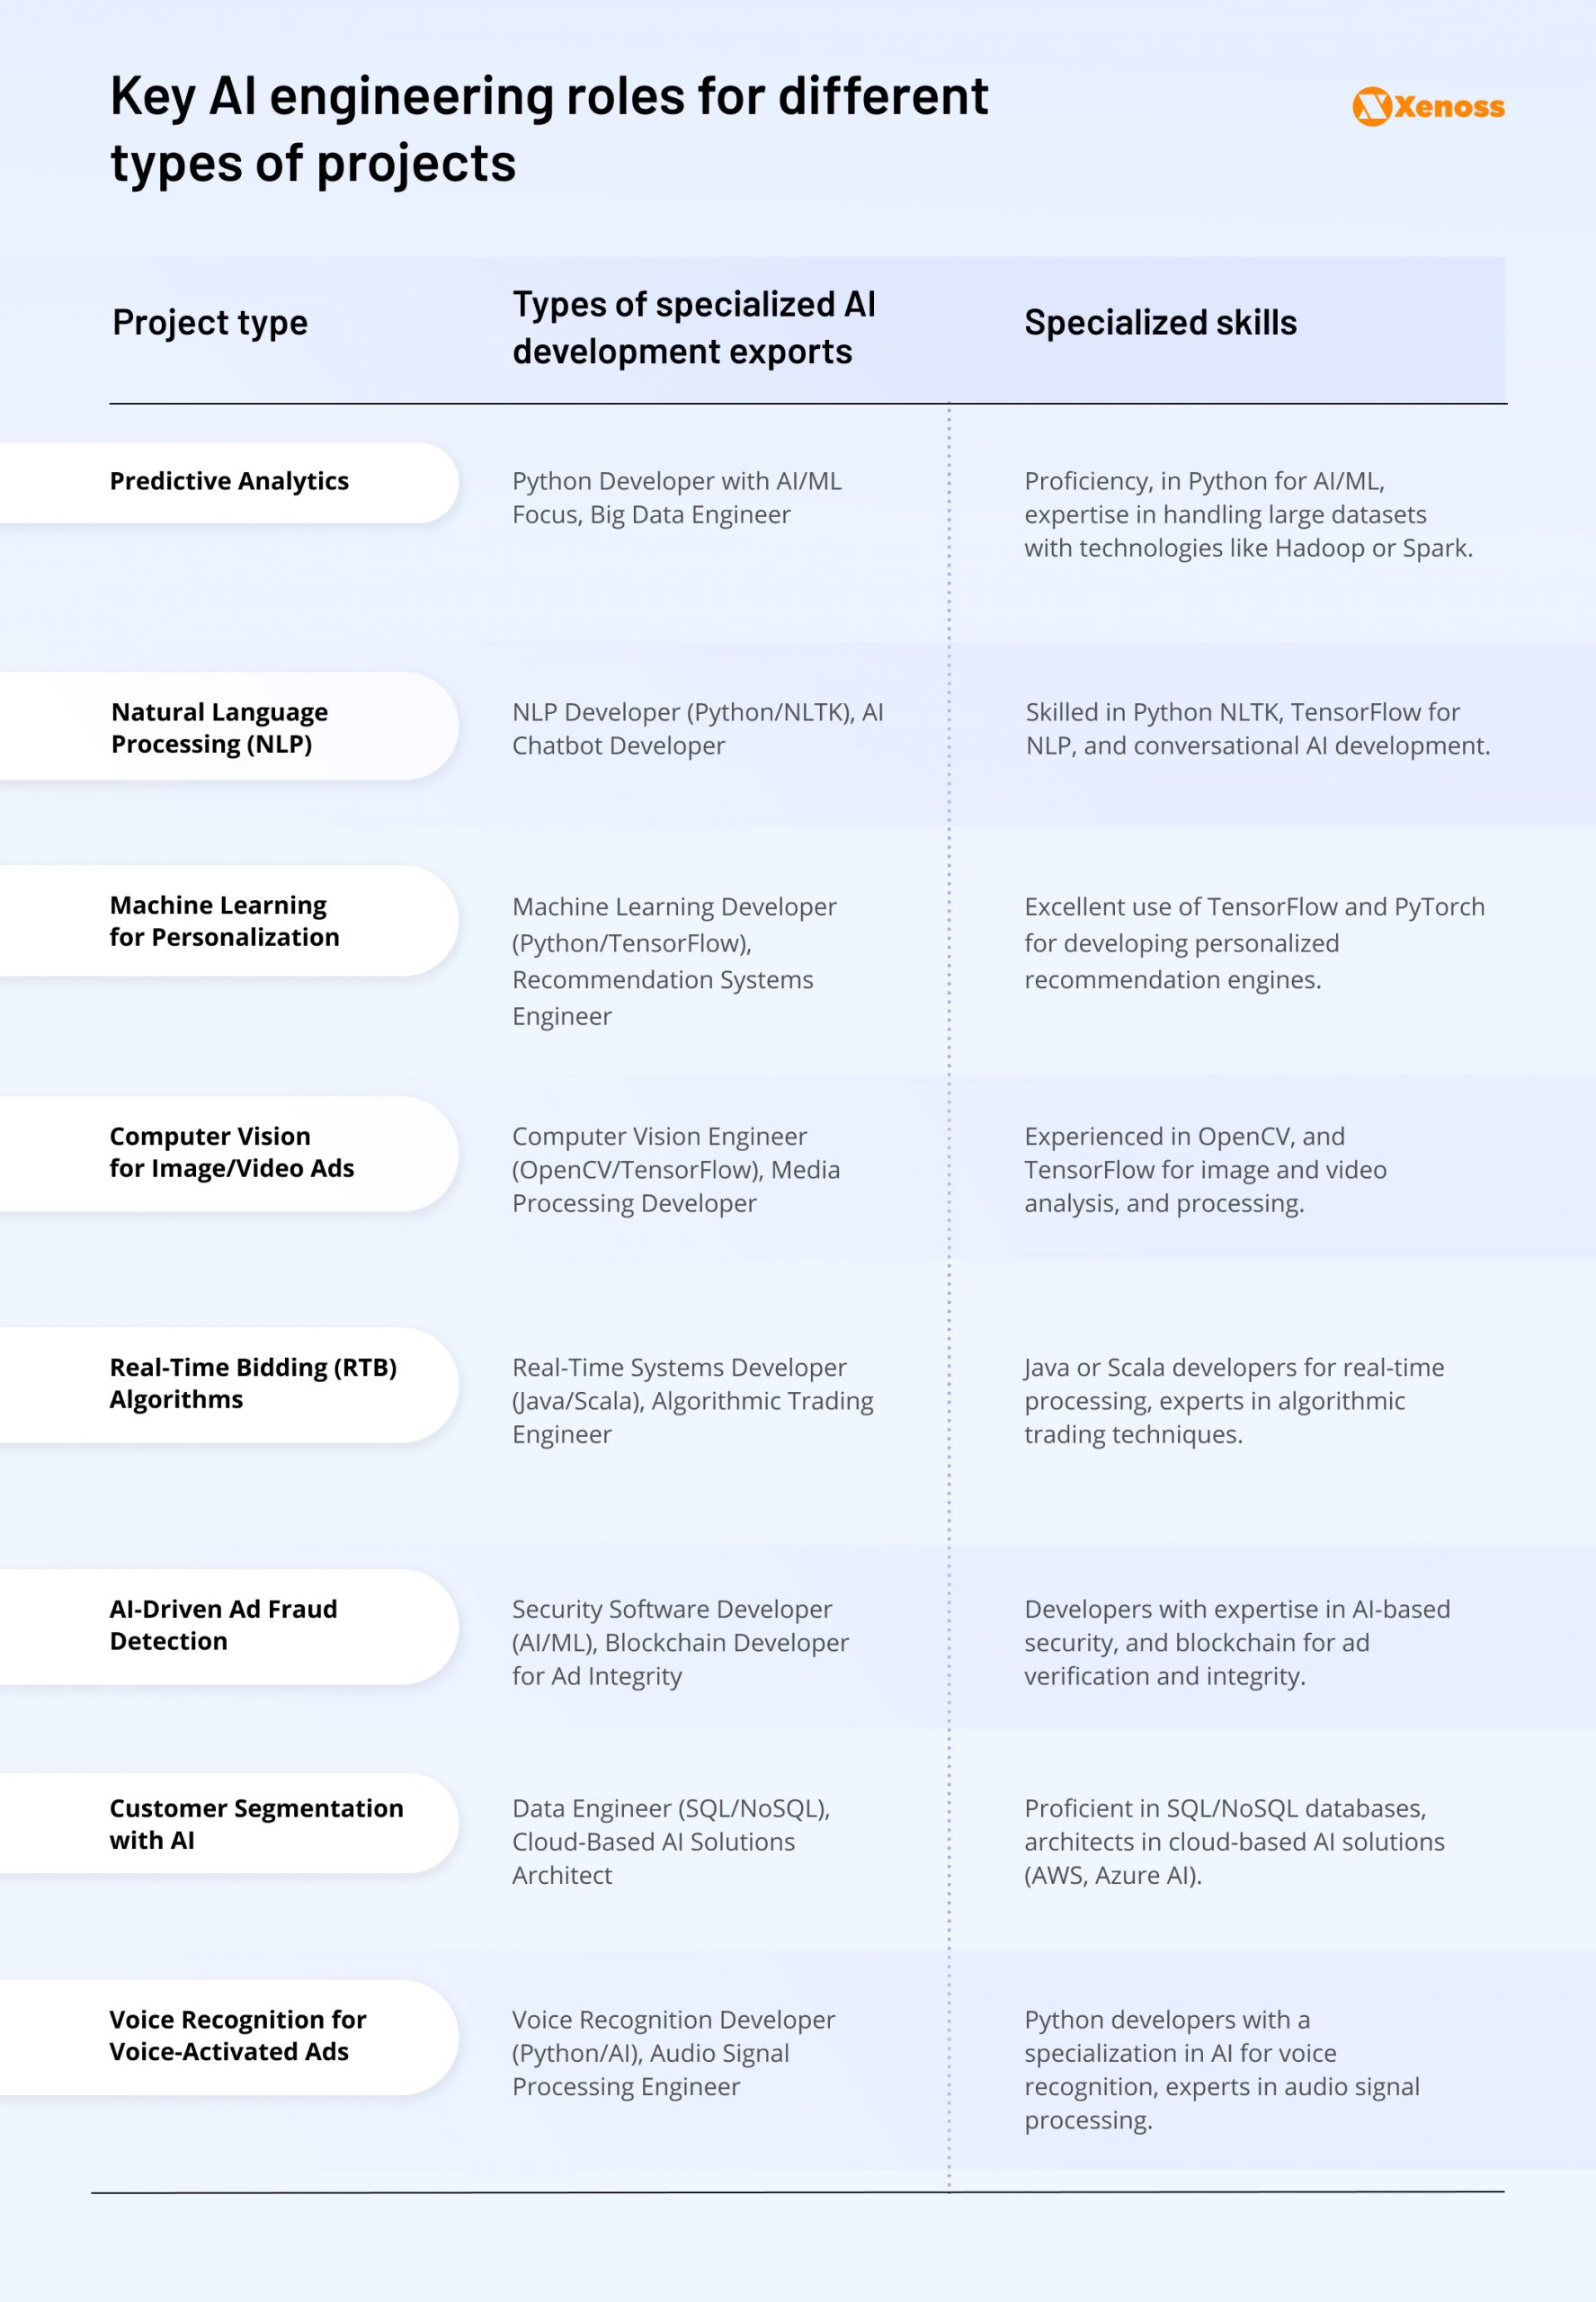 Table describing roles and relative specialized skills for different types of AI projects in MarTech and AdTech